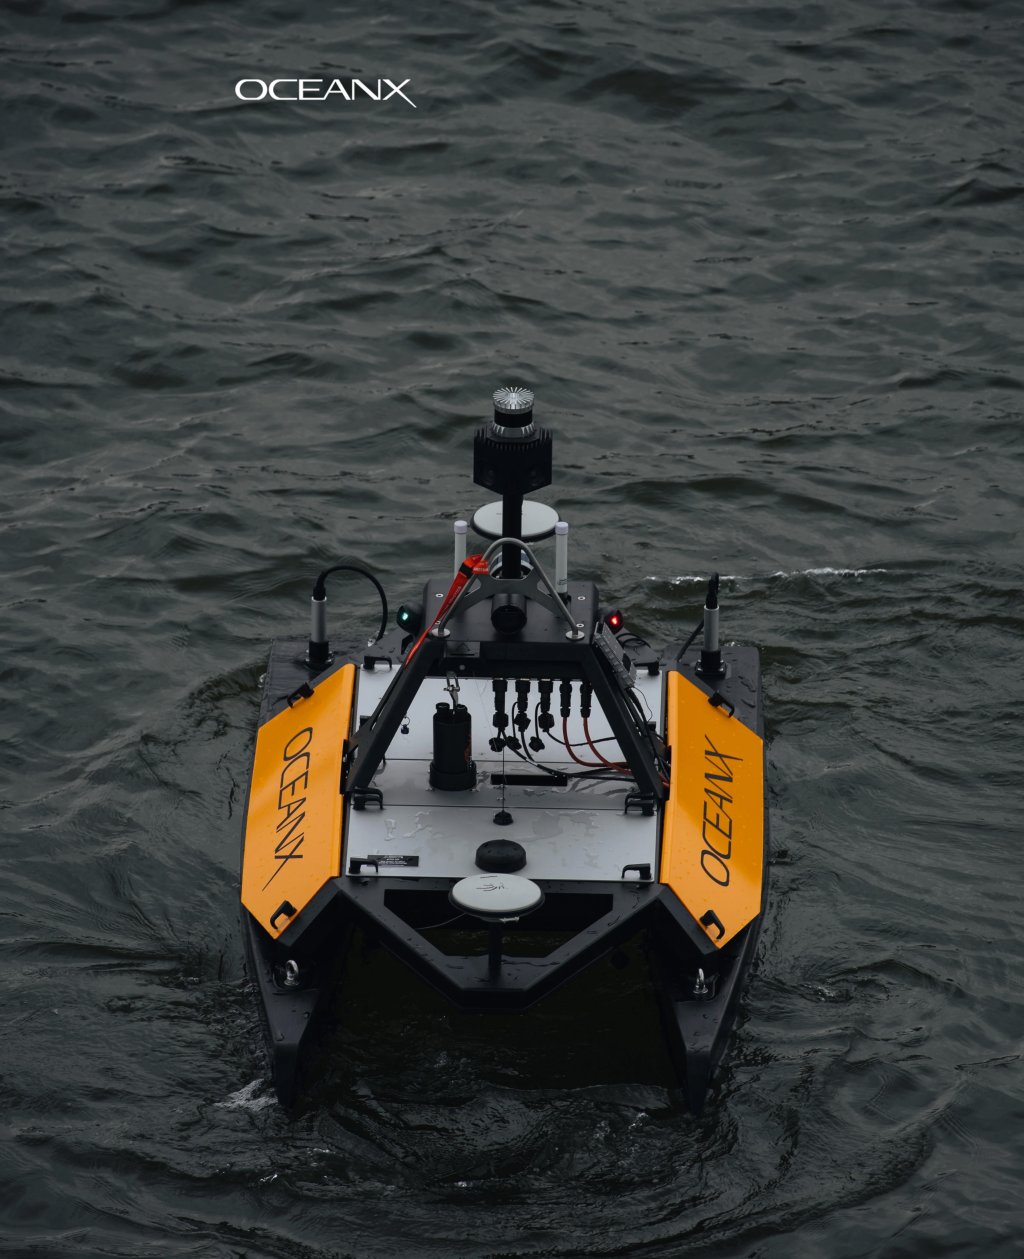 Front view of the Otter USV vessel with the SeaSight addon in the water.